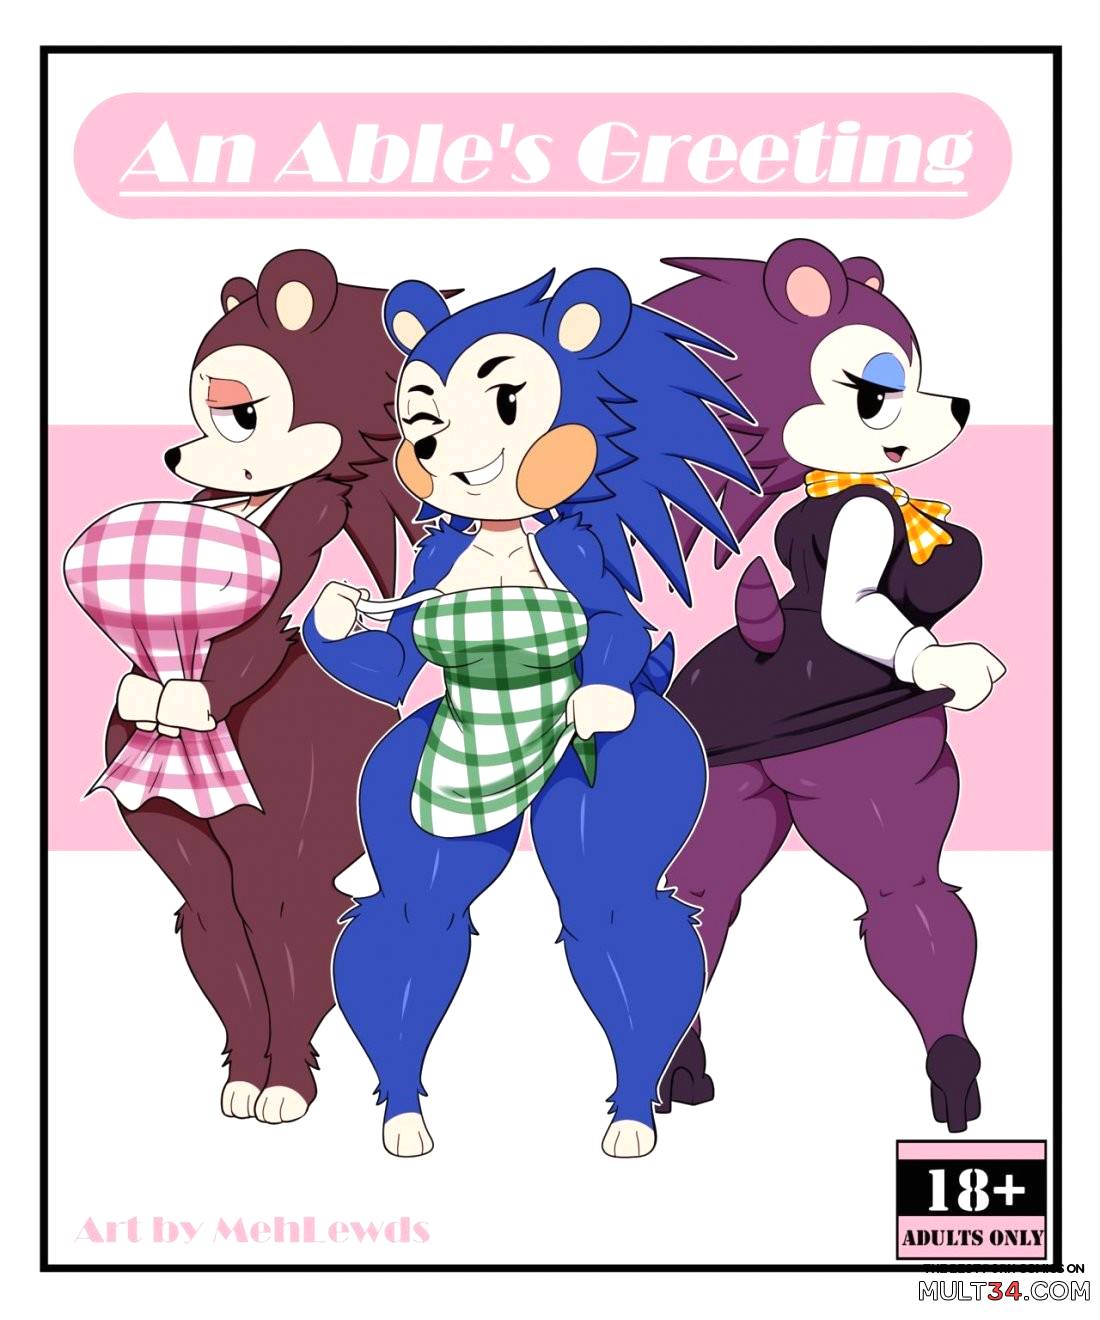 An Able's Greeting page 1